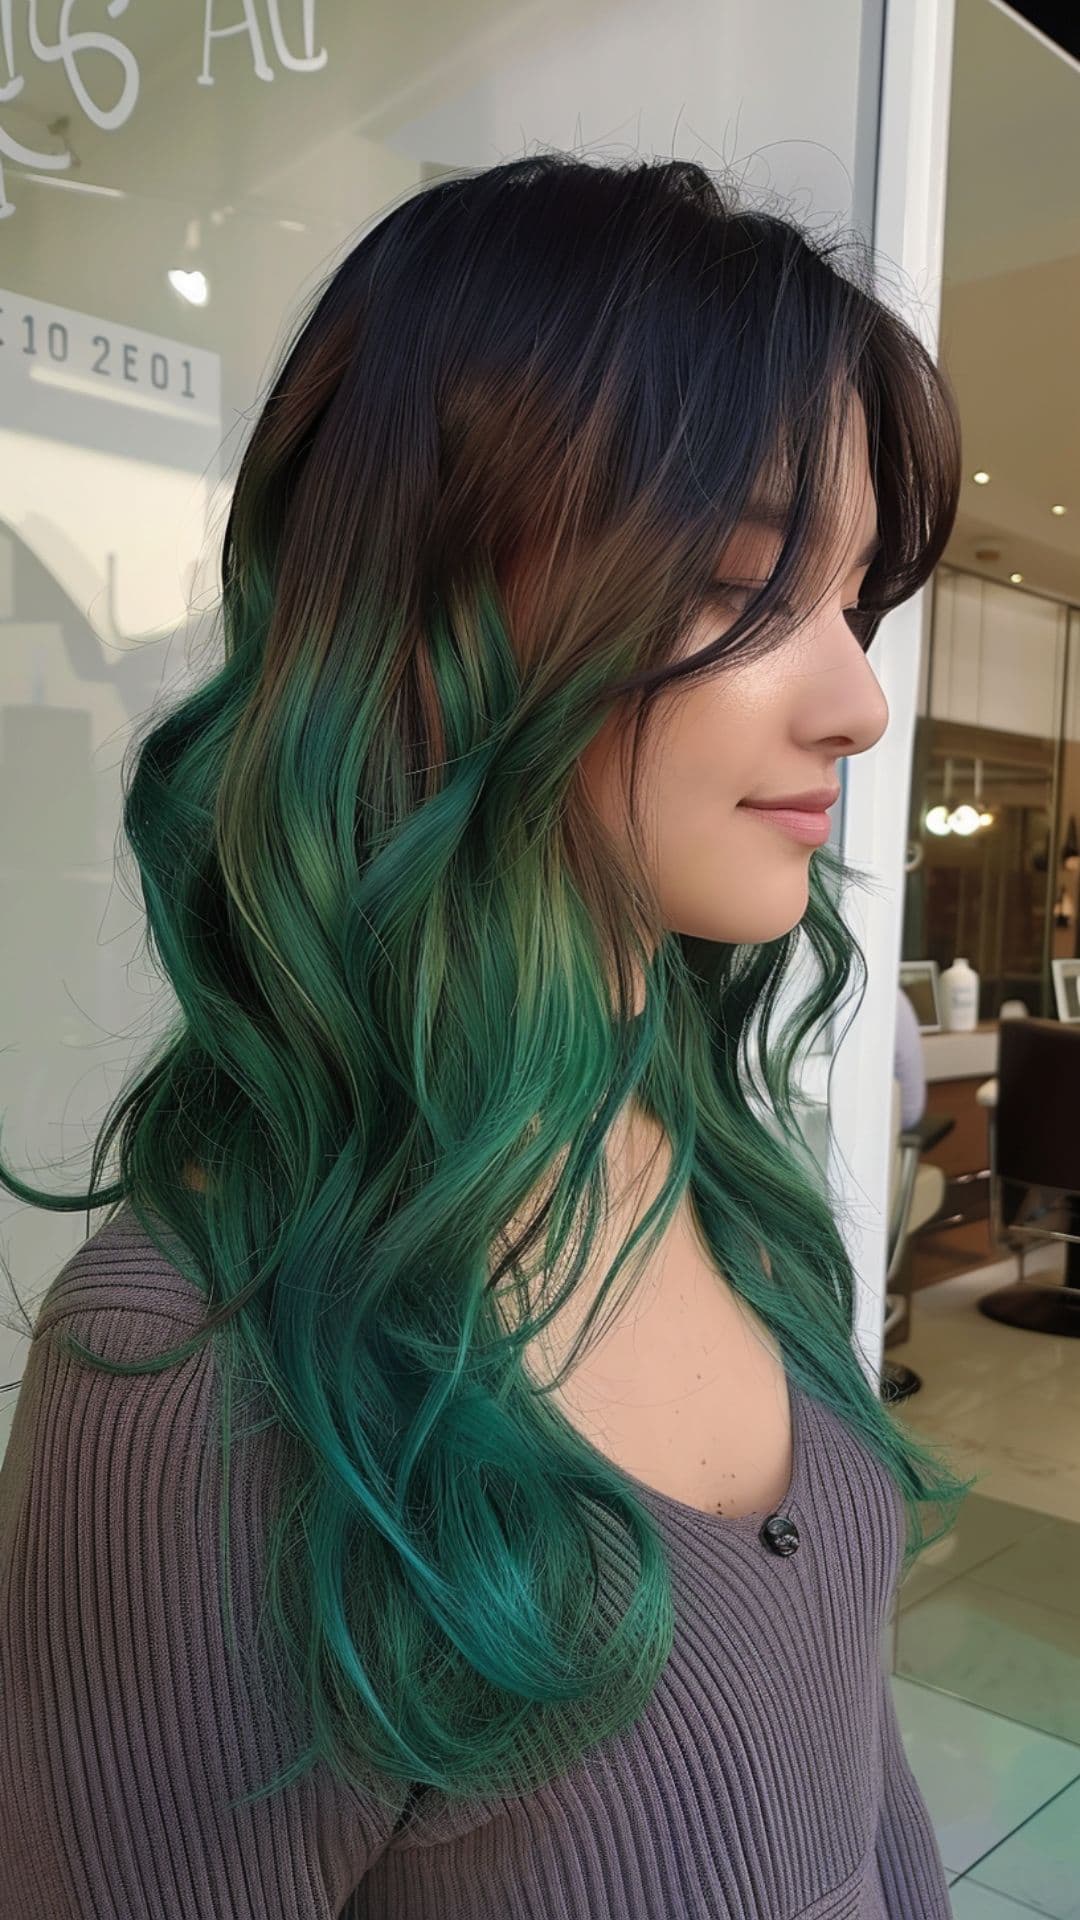 A woman modelling a black and green hair.